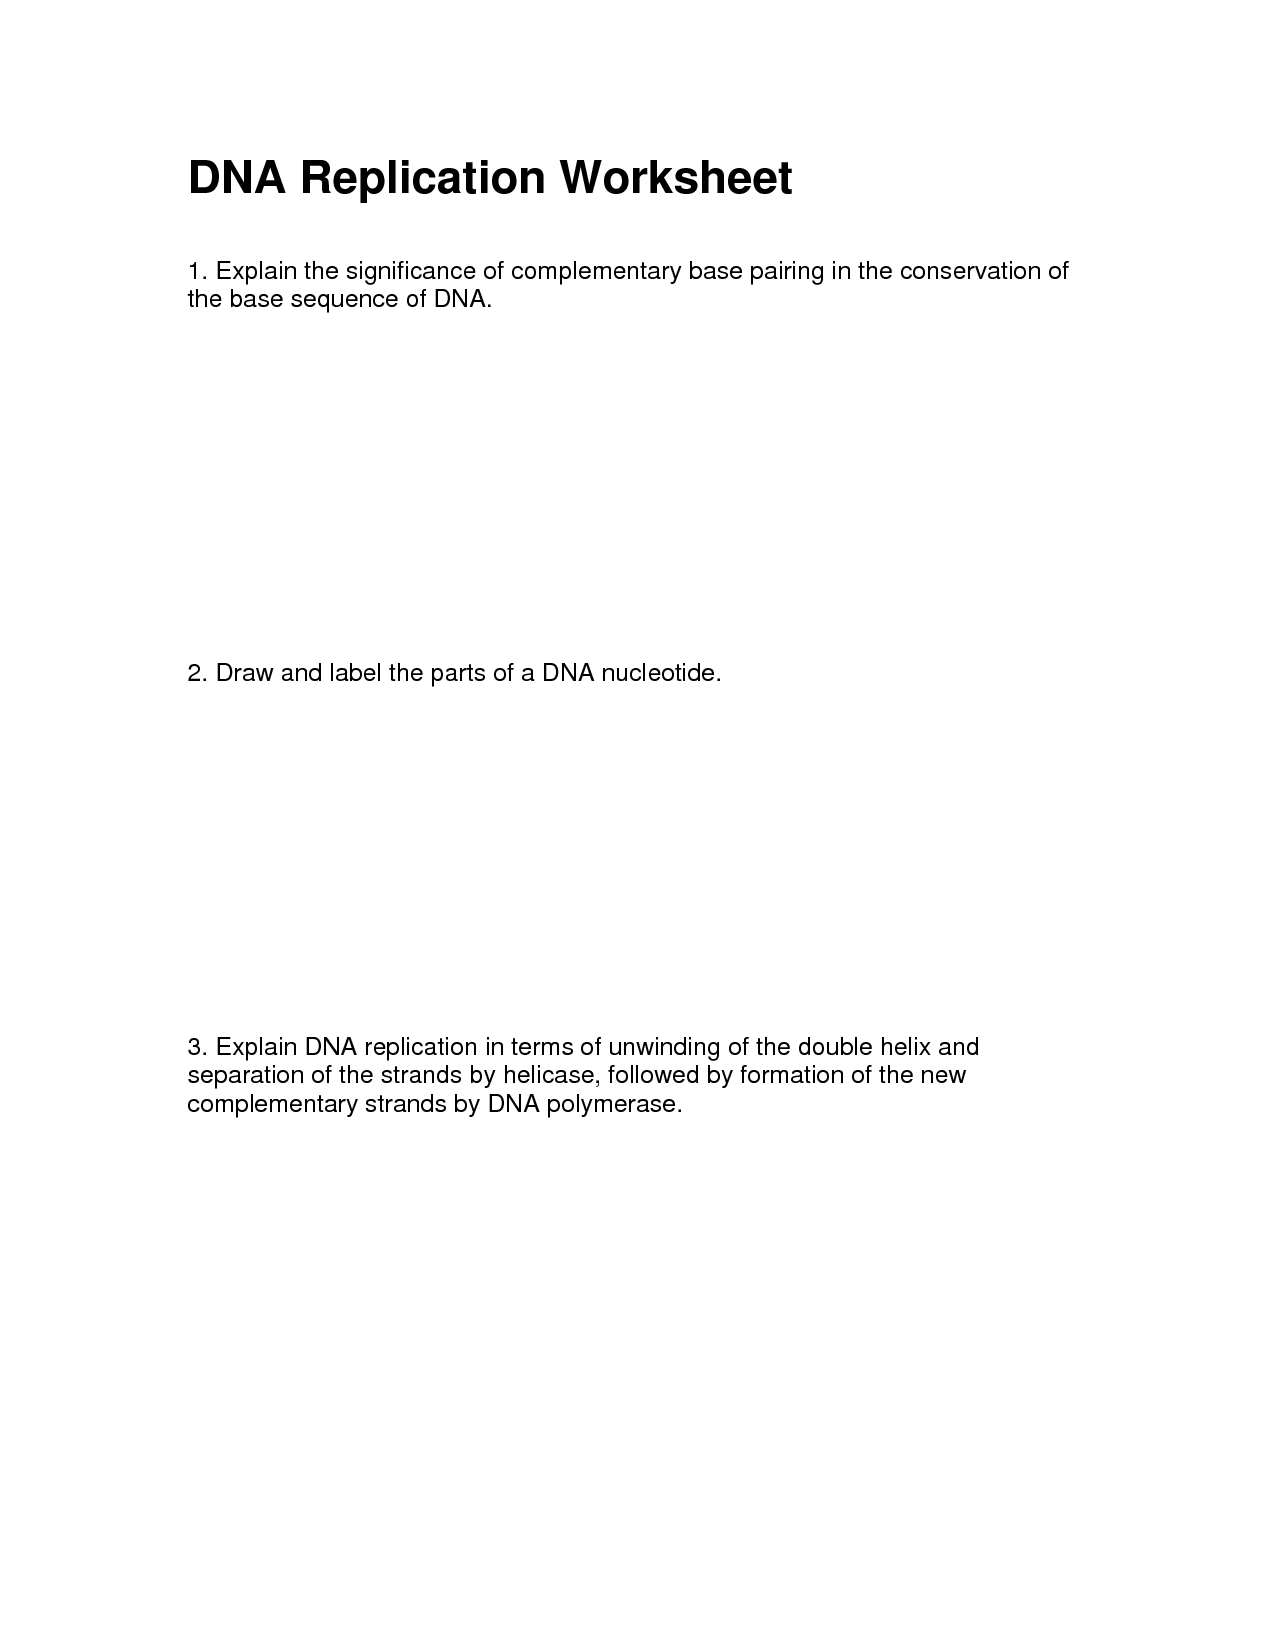 DNA Replication Complementary Base Pairing Worksheets Image